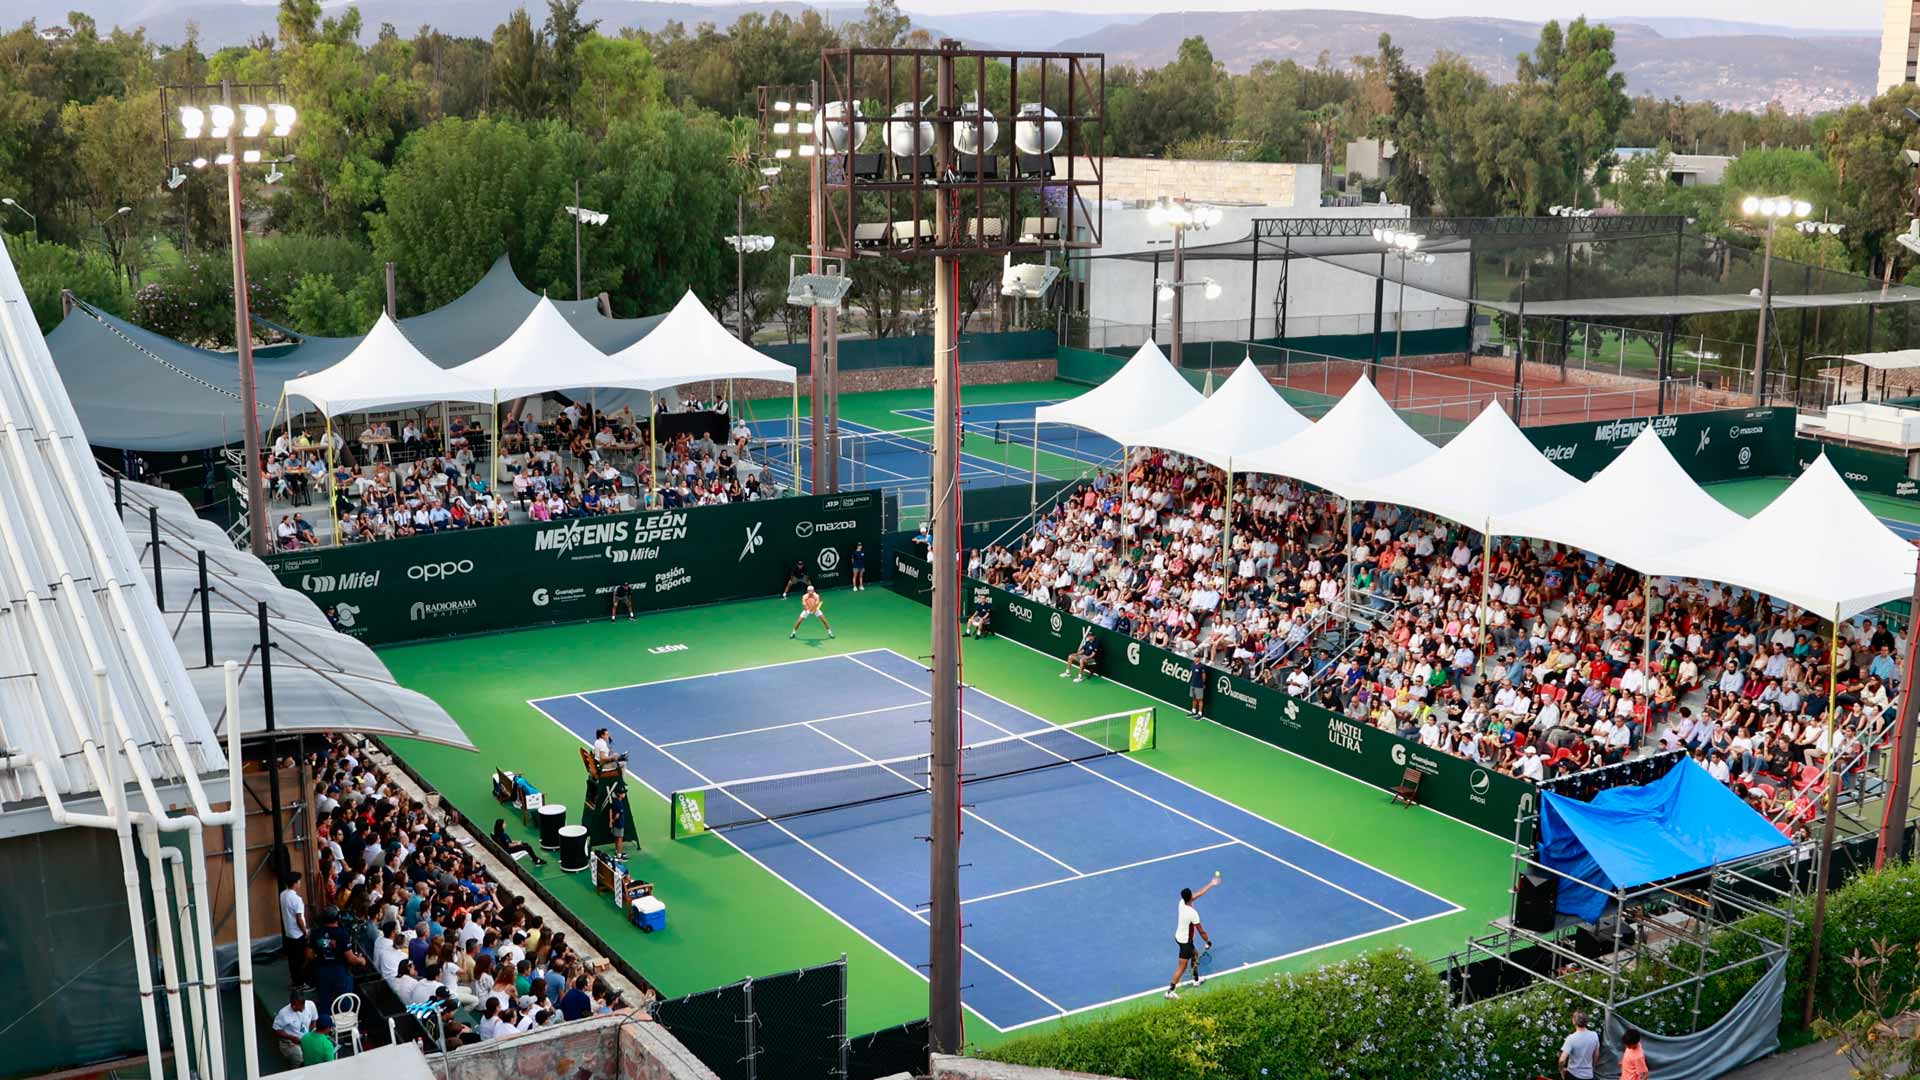 Club Campestre is the host site for the Mextenis León Open.